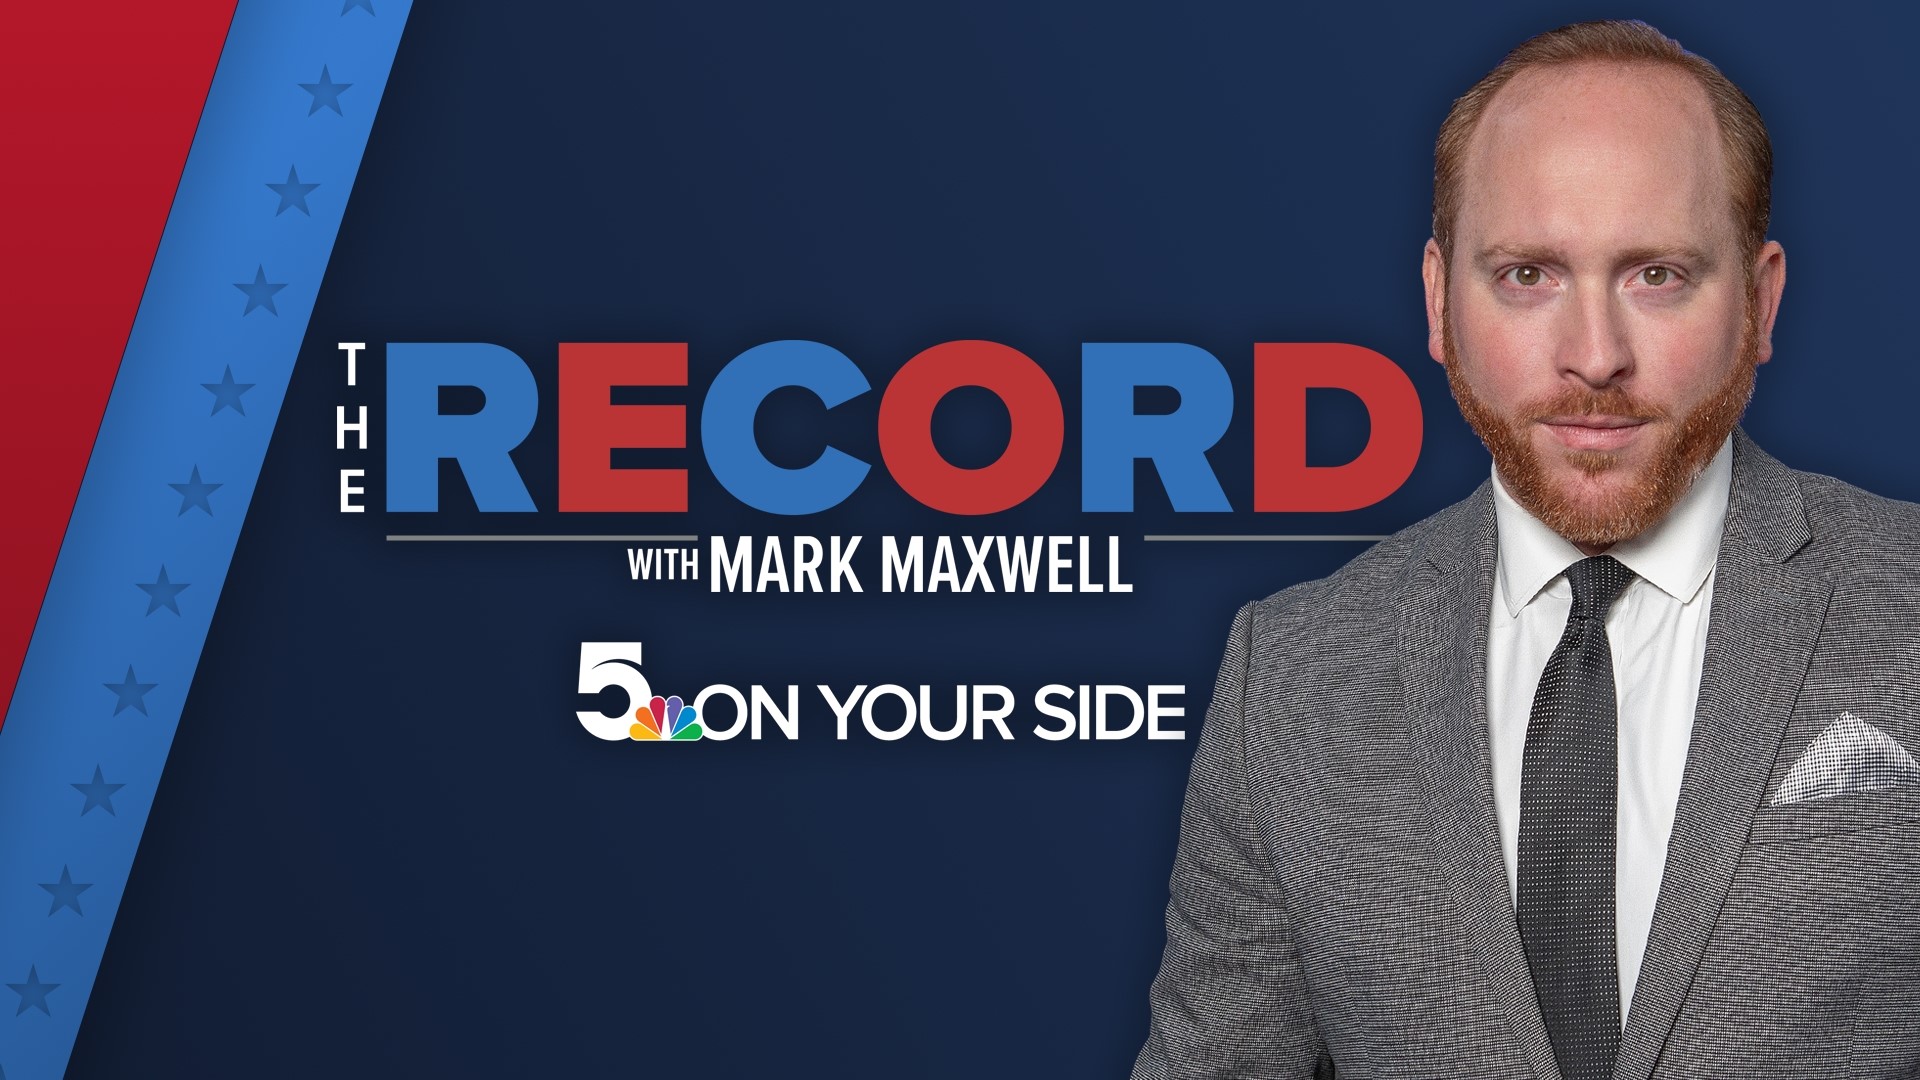 5 On Your Side political editor Mark Maxwell is joined by political newsmakers to discuss the stories making headlines in Missouri and Illinois.